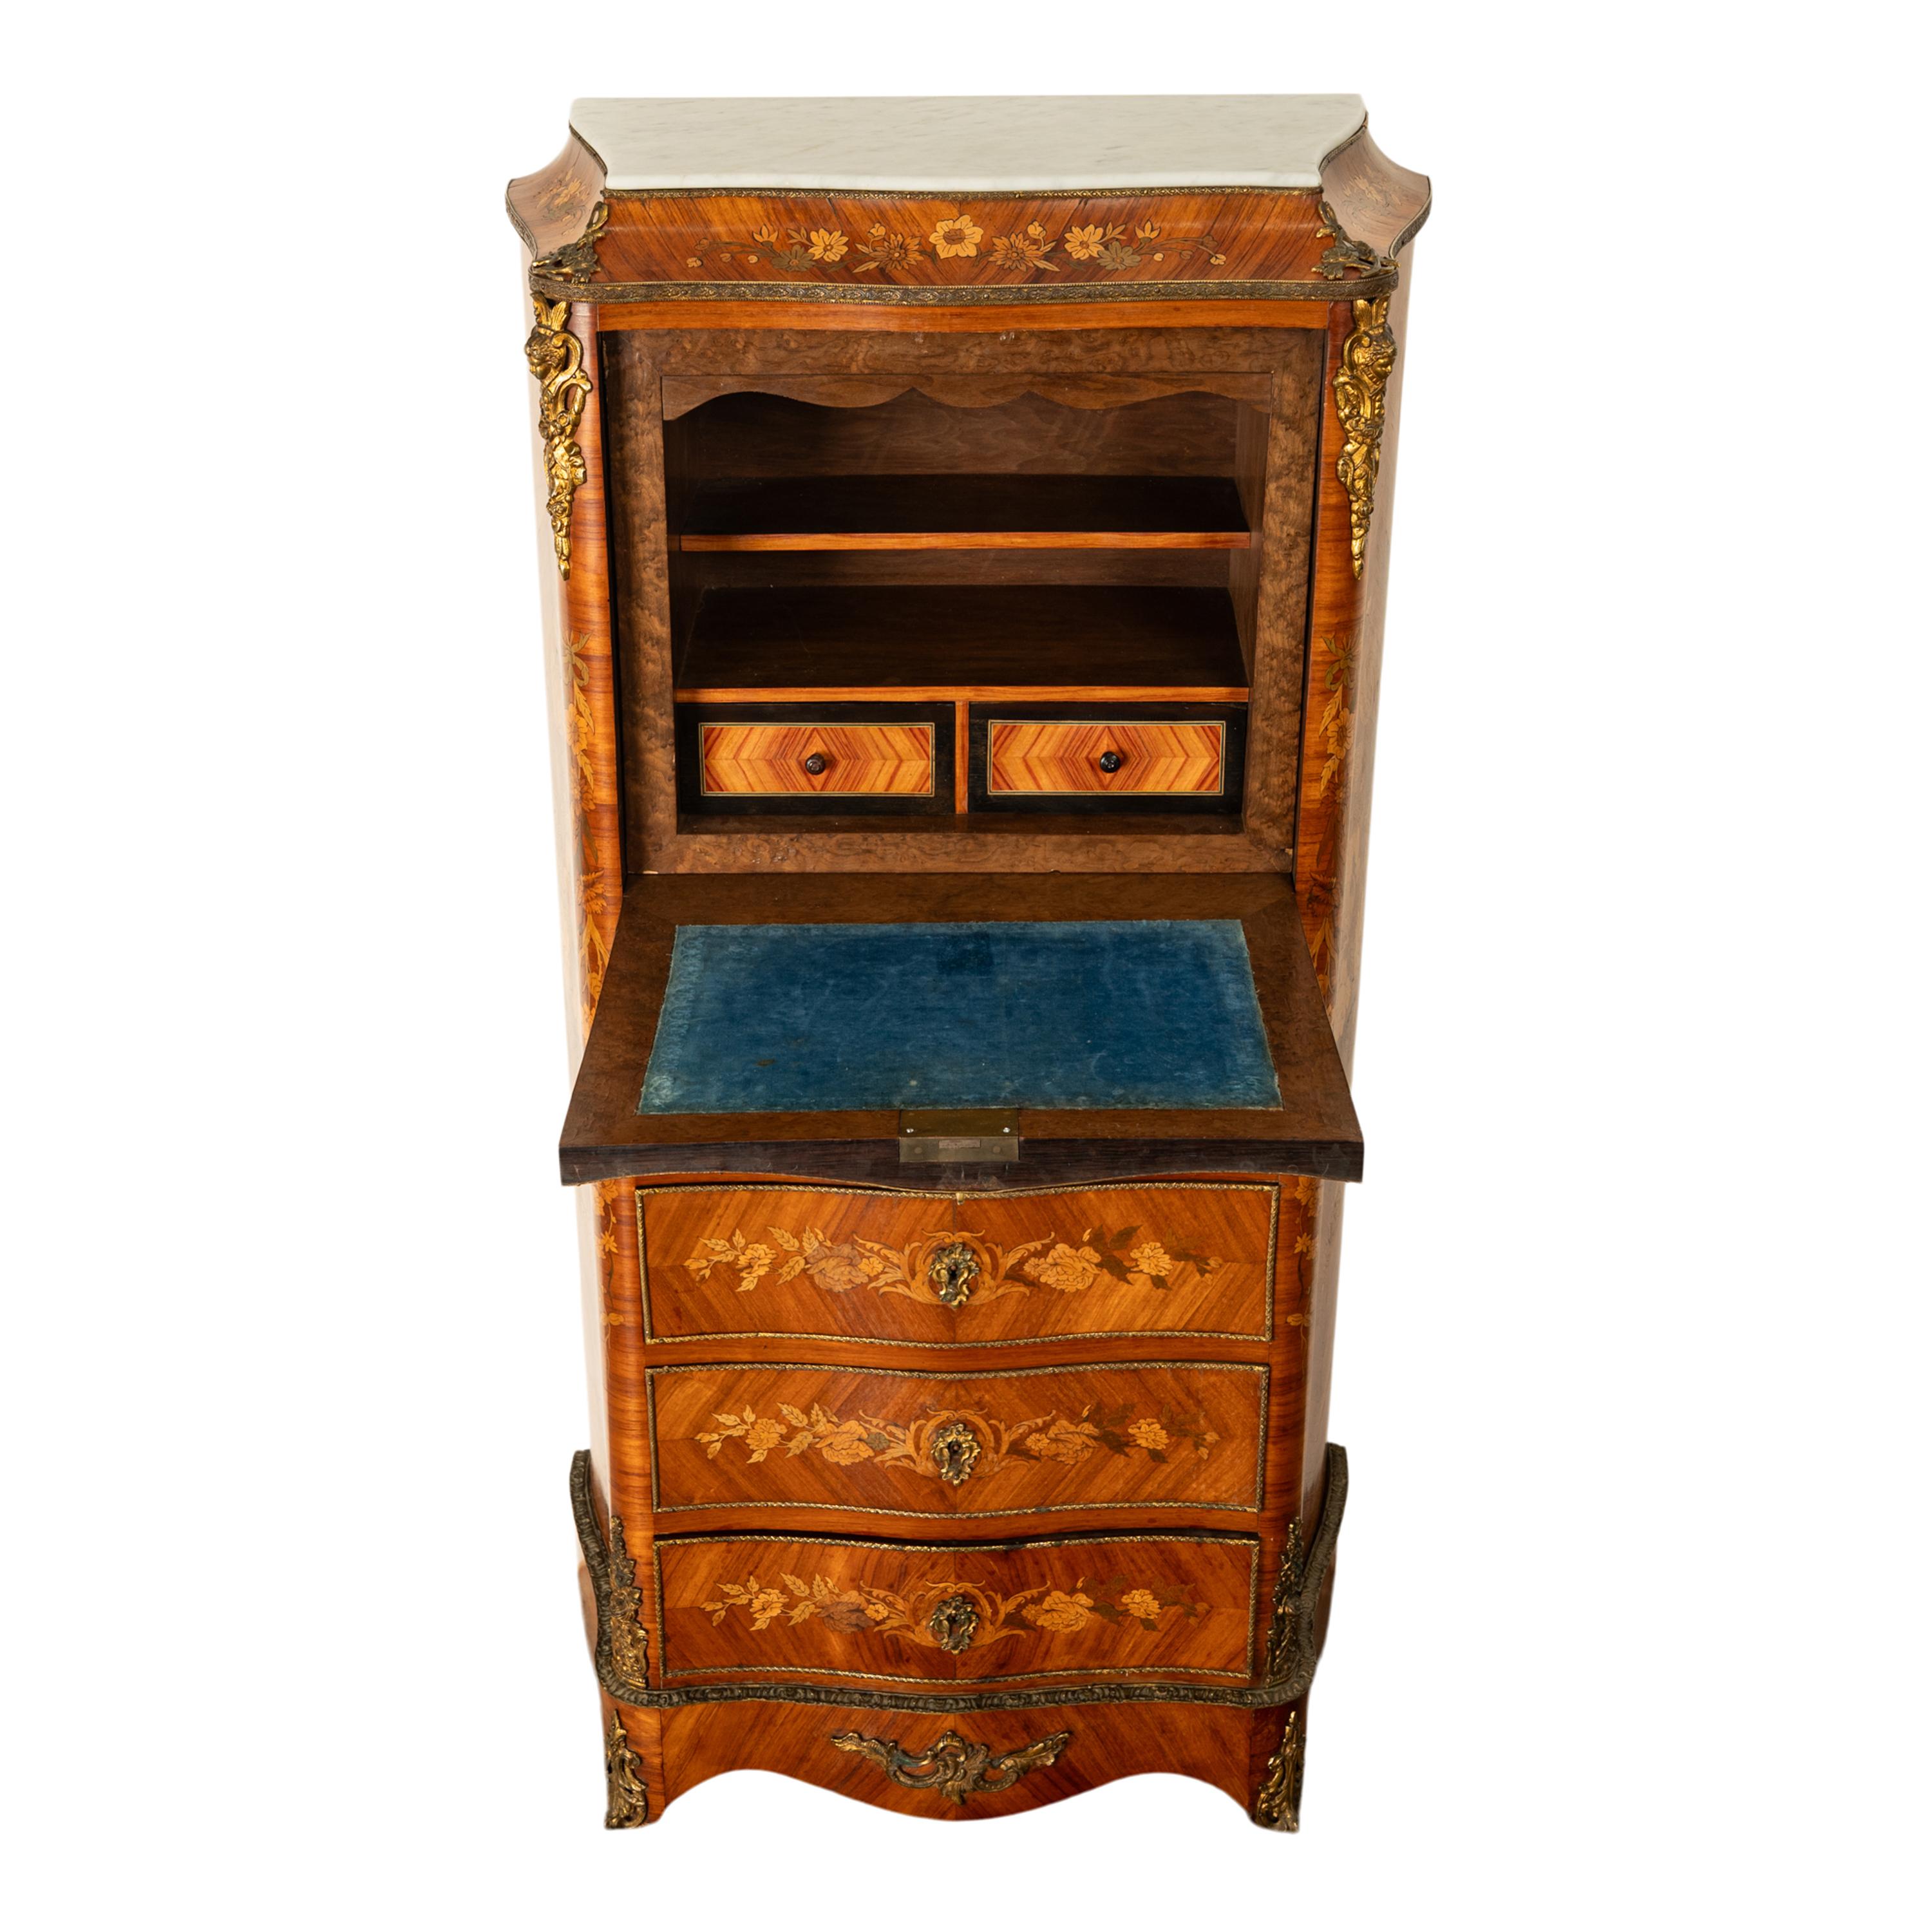 Fine Antique French Louis XV Marquetry Rosewood Ormolu Secretaire Abattant 1880 For Sale 3